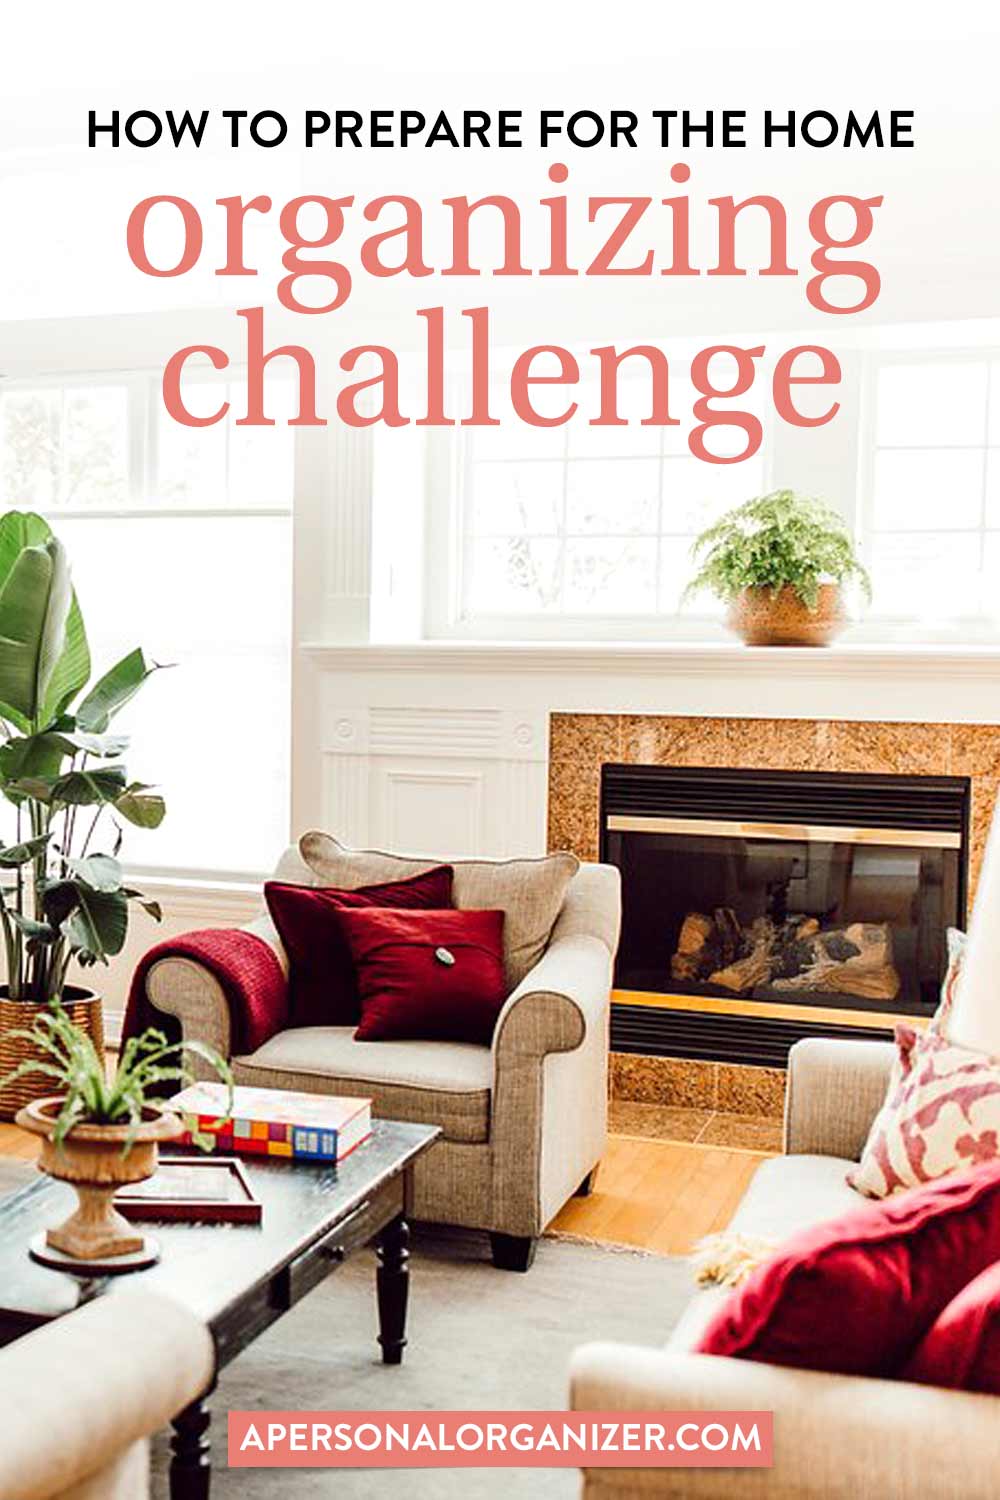 The Home Organizing Challenge – How To Prepare For It